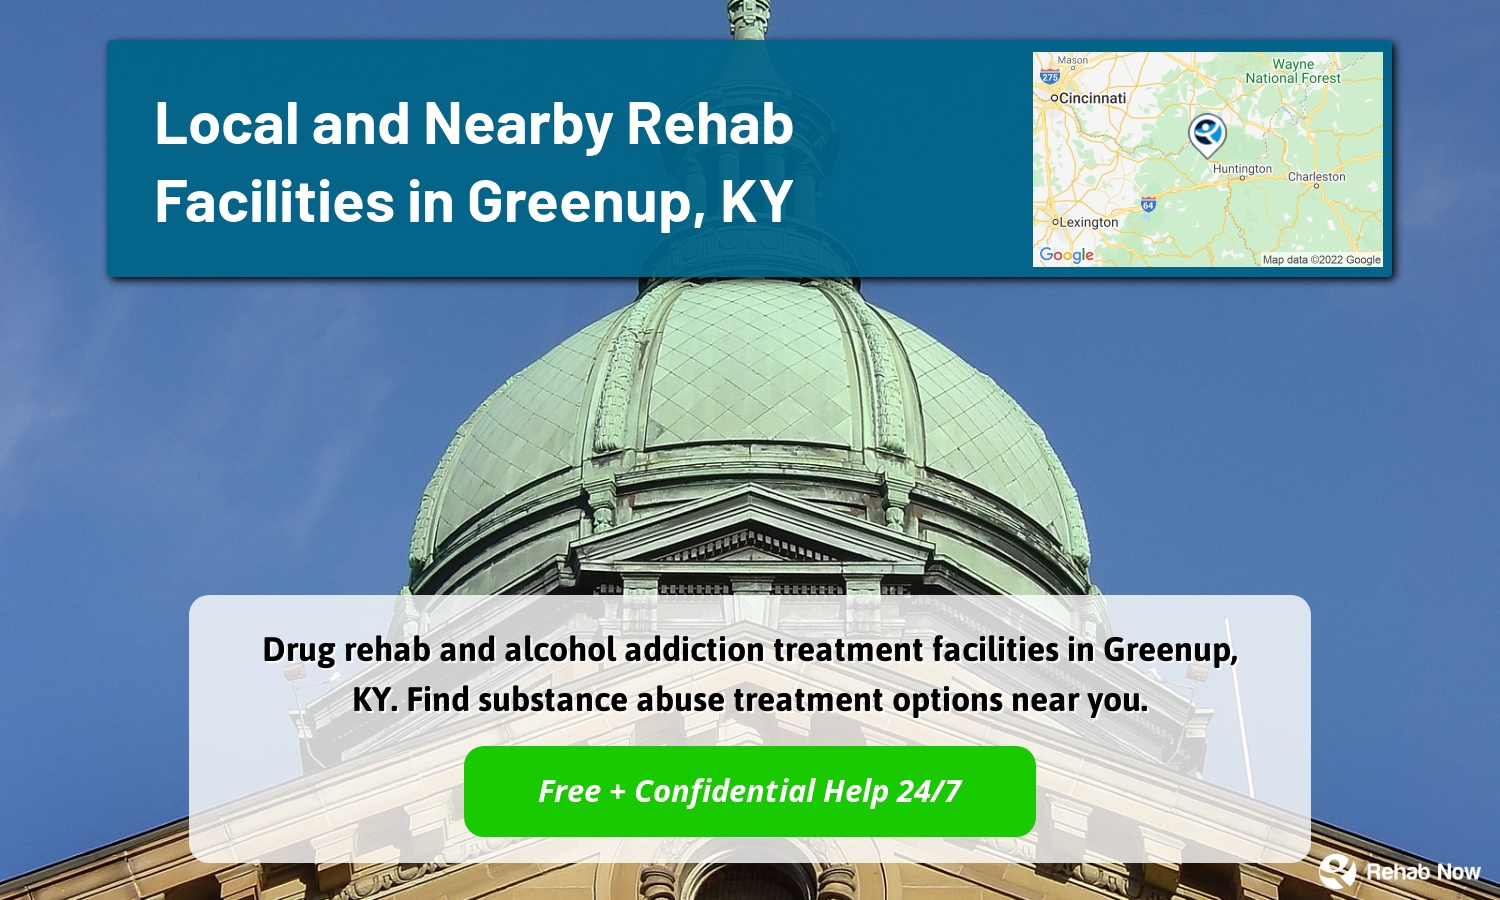 Drug rehab and alcohol addiction treatment facilities in Greenup, KY. Find substance abuse treatment options near you.